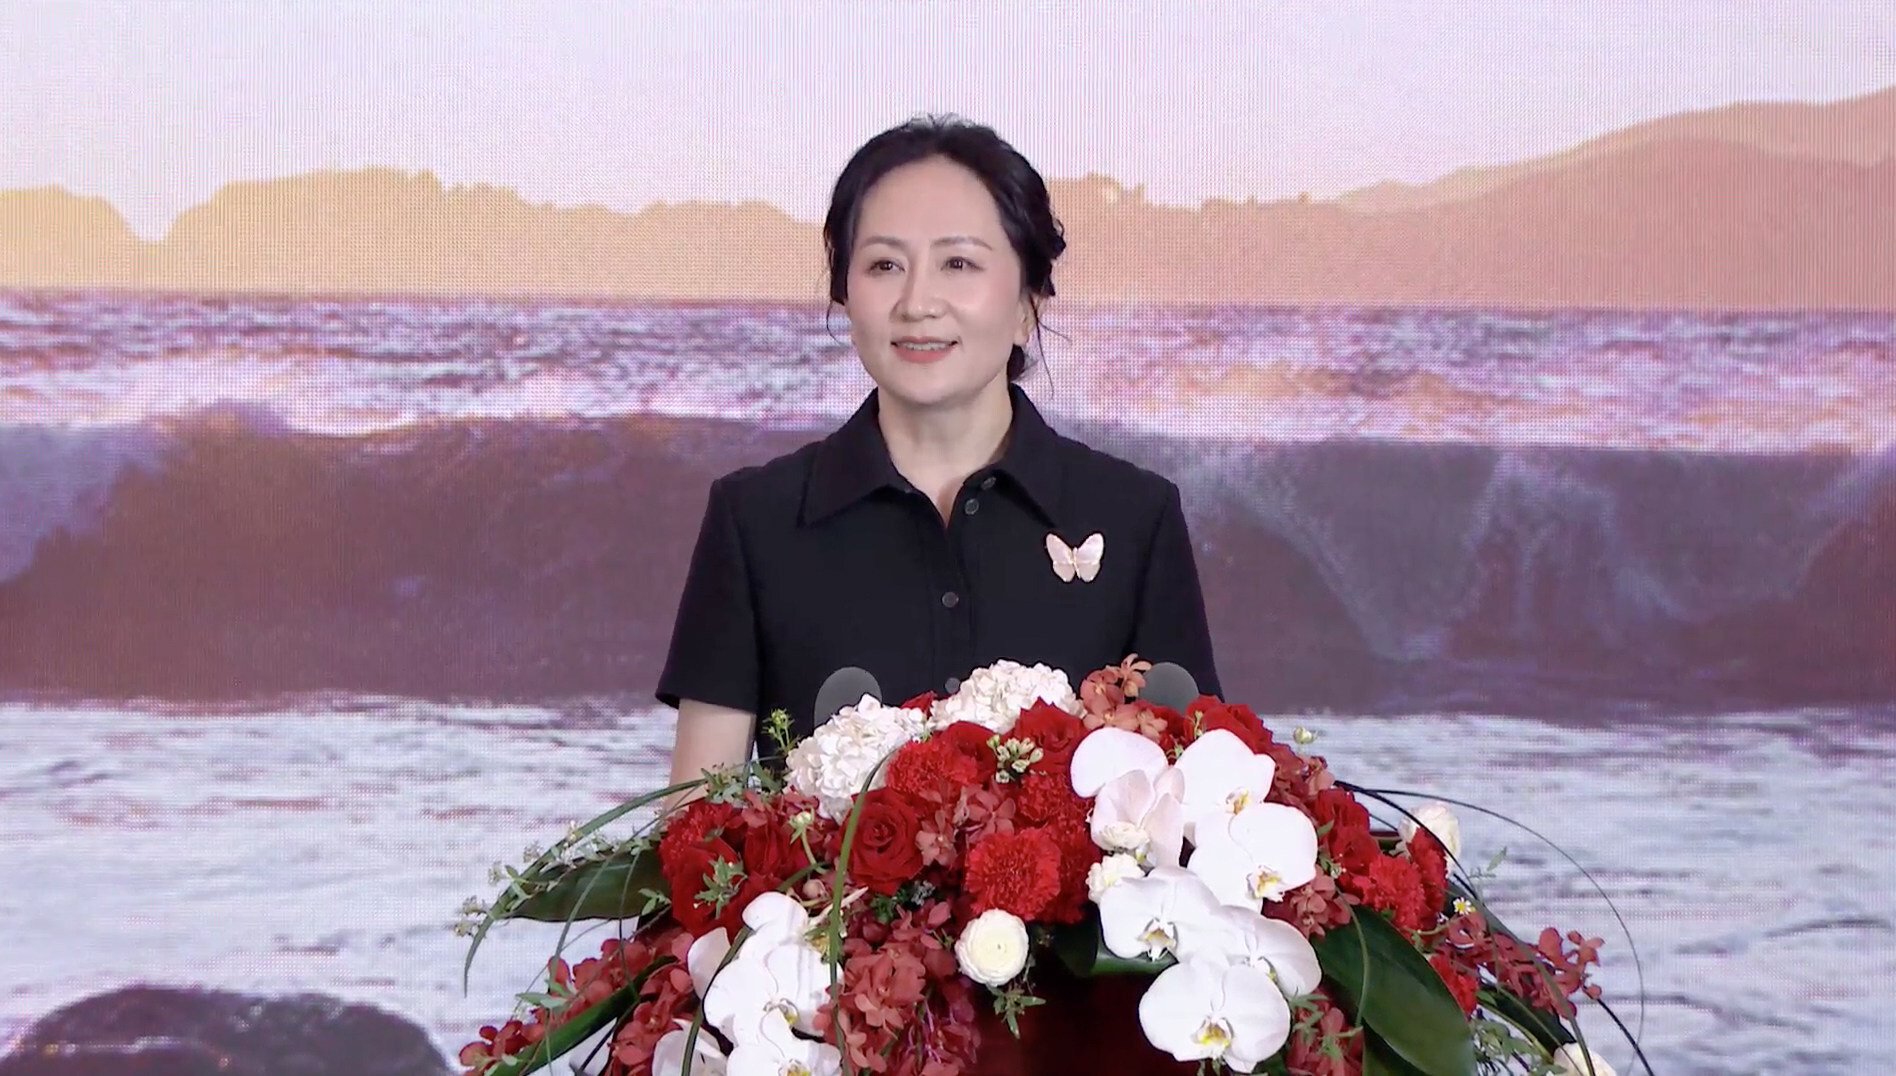 Huawei Technologies Co chief financial officer Meng Wanzhou speaks at a press conference for the company’s latest annual report in Shenzhen, in southern Guangdong province, on March 28, 2022. Photo: Iris Deng